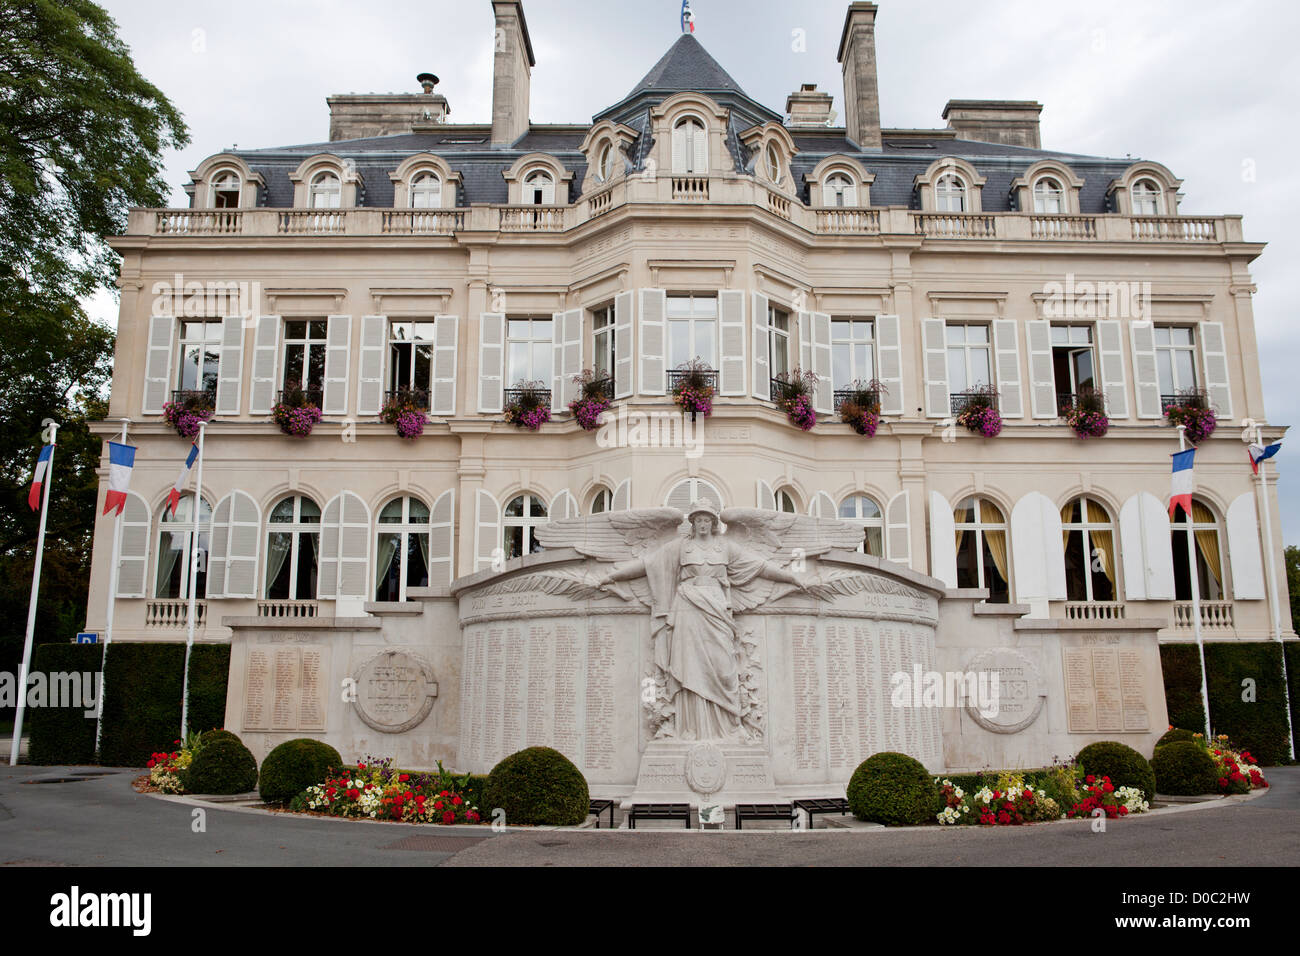 Hotel de Ville and monument to the fallen during world war, Epernay, Champagne Ardenne France Stock Photo